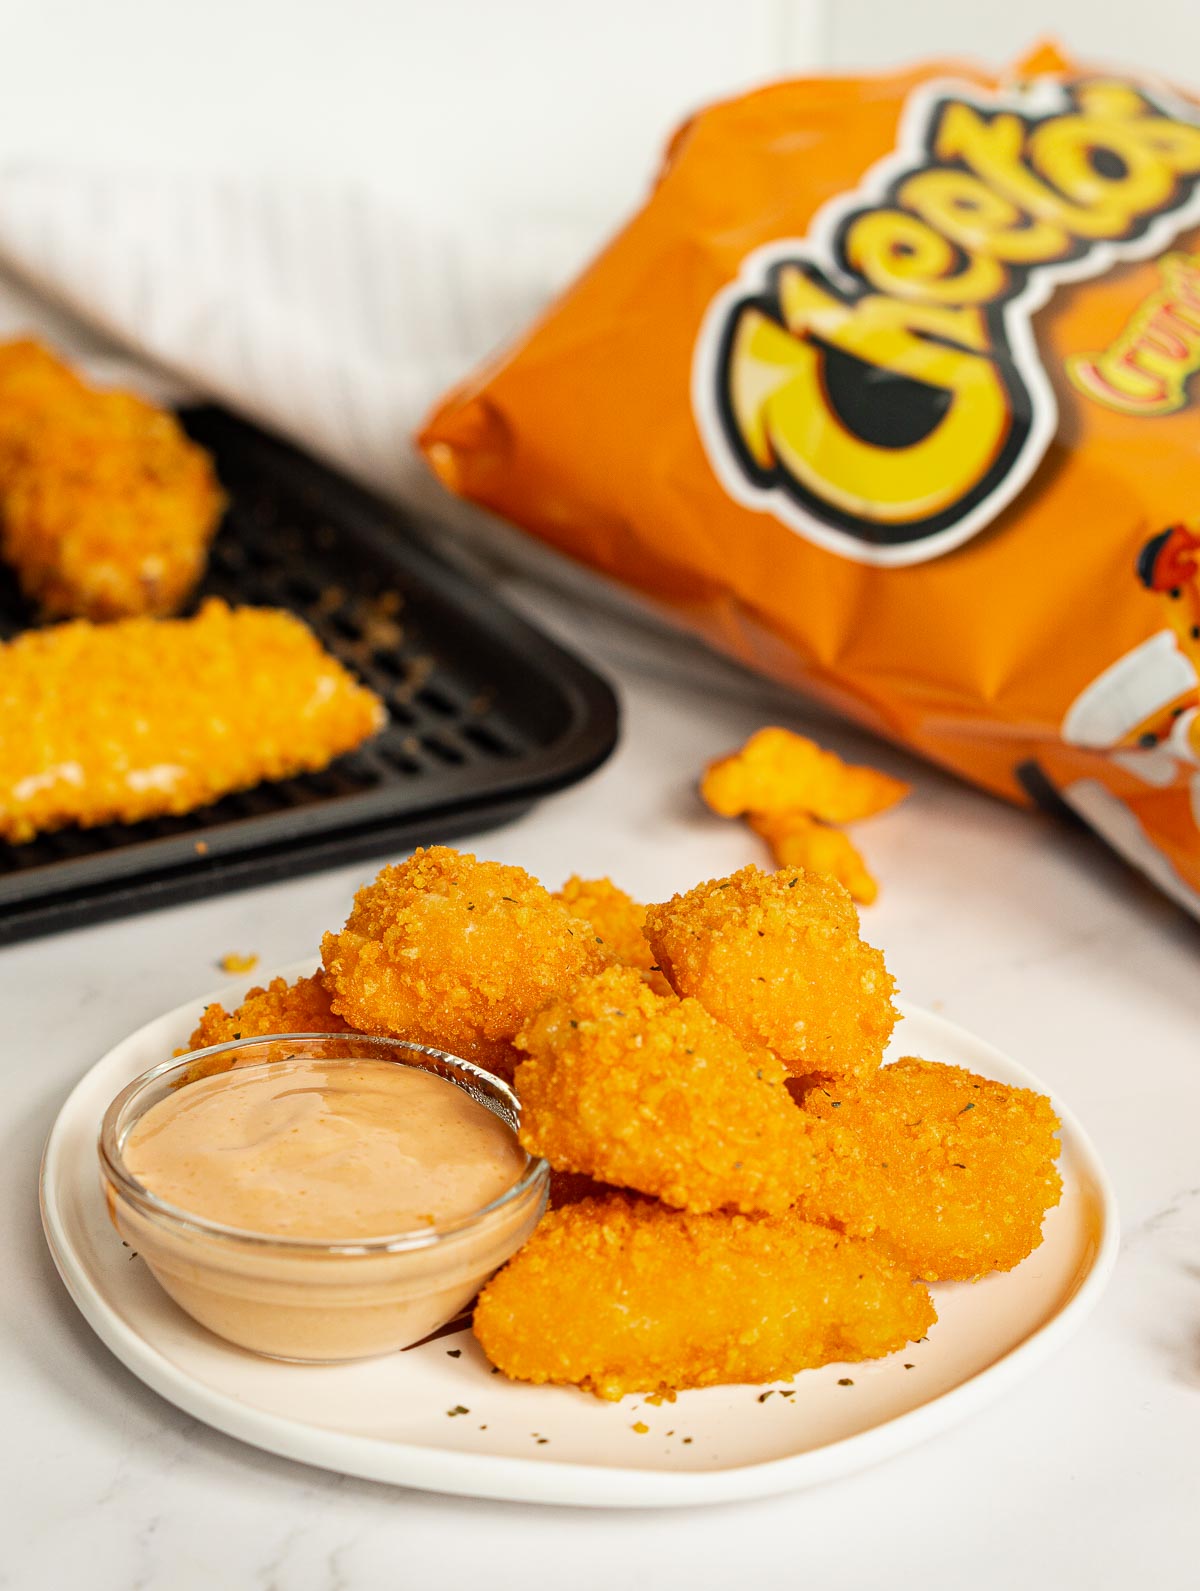 Cheetos chicken nuggets on a plate with dip.